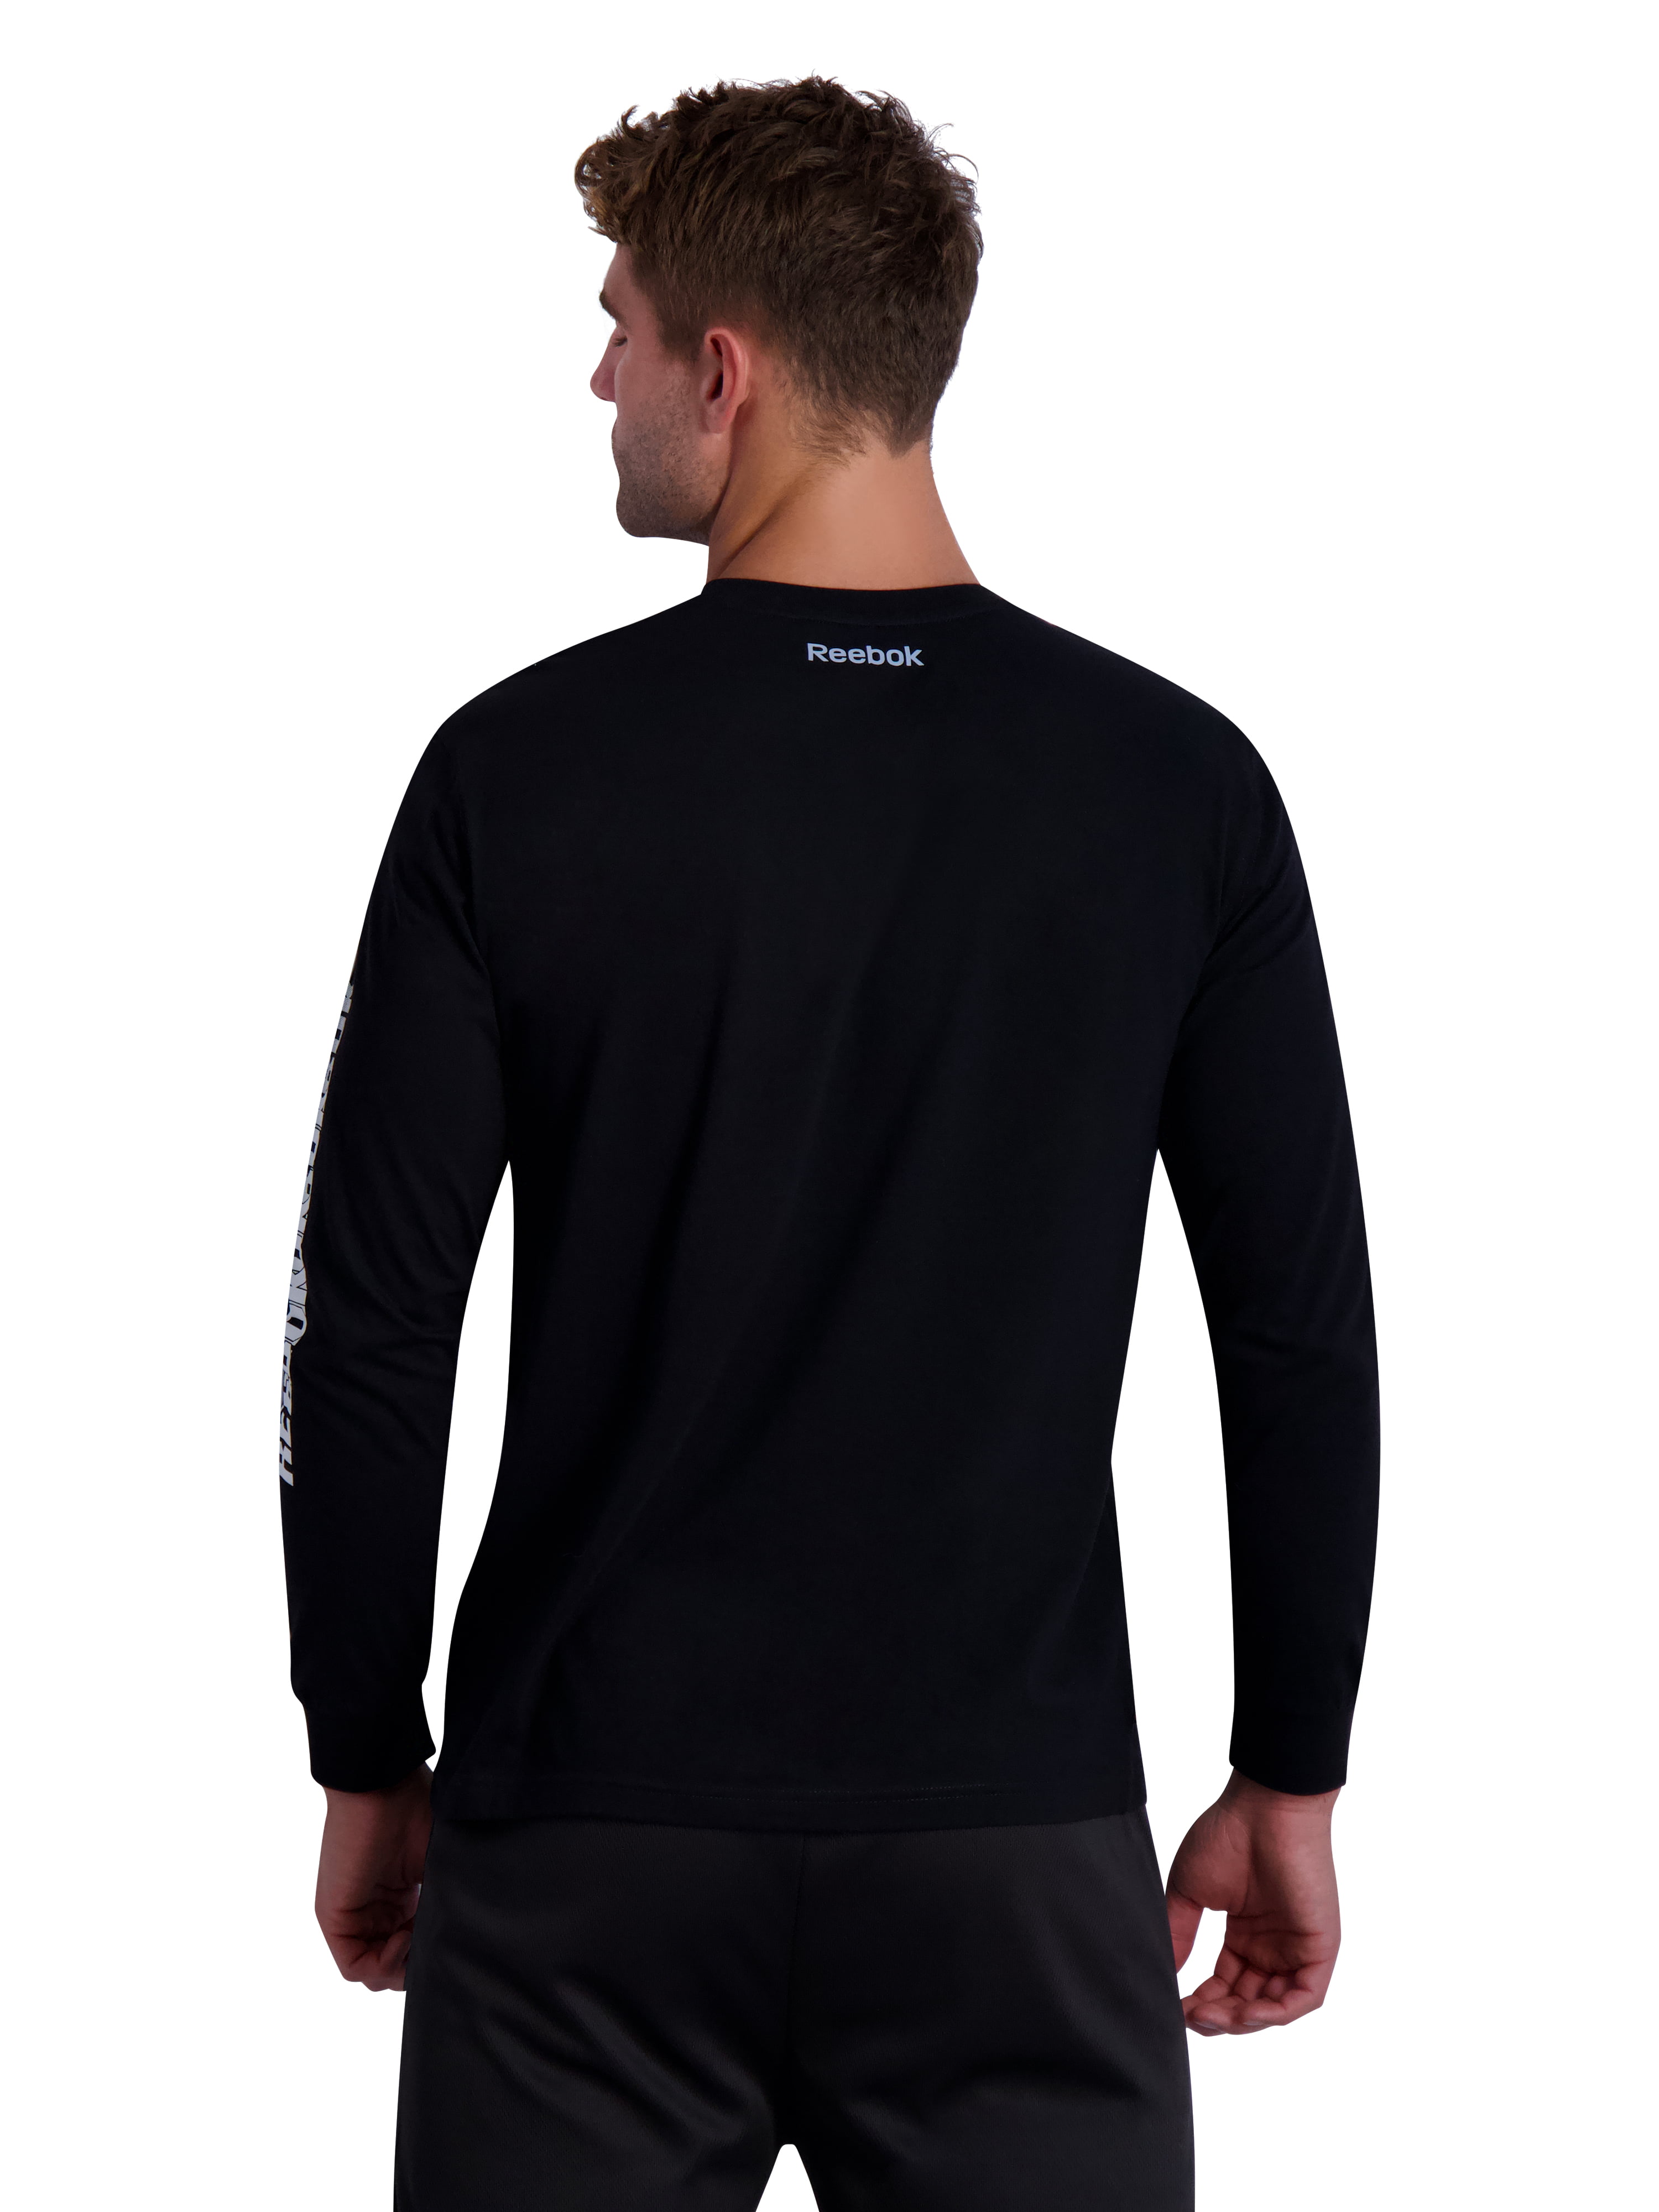 Reebok Men's Momentum Graphic Long Sleeve Tee (2-Pack), up to Size 3XL